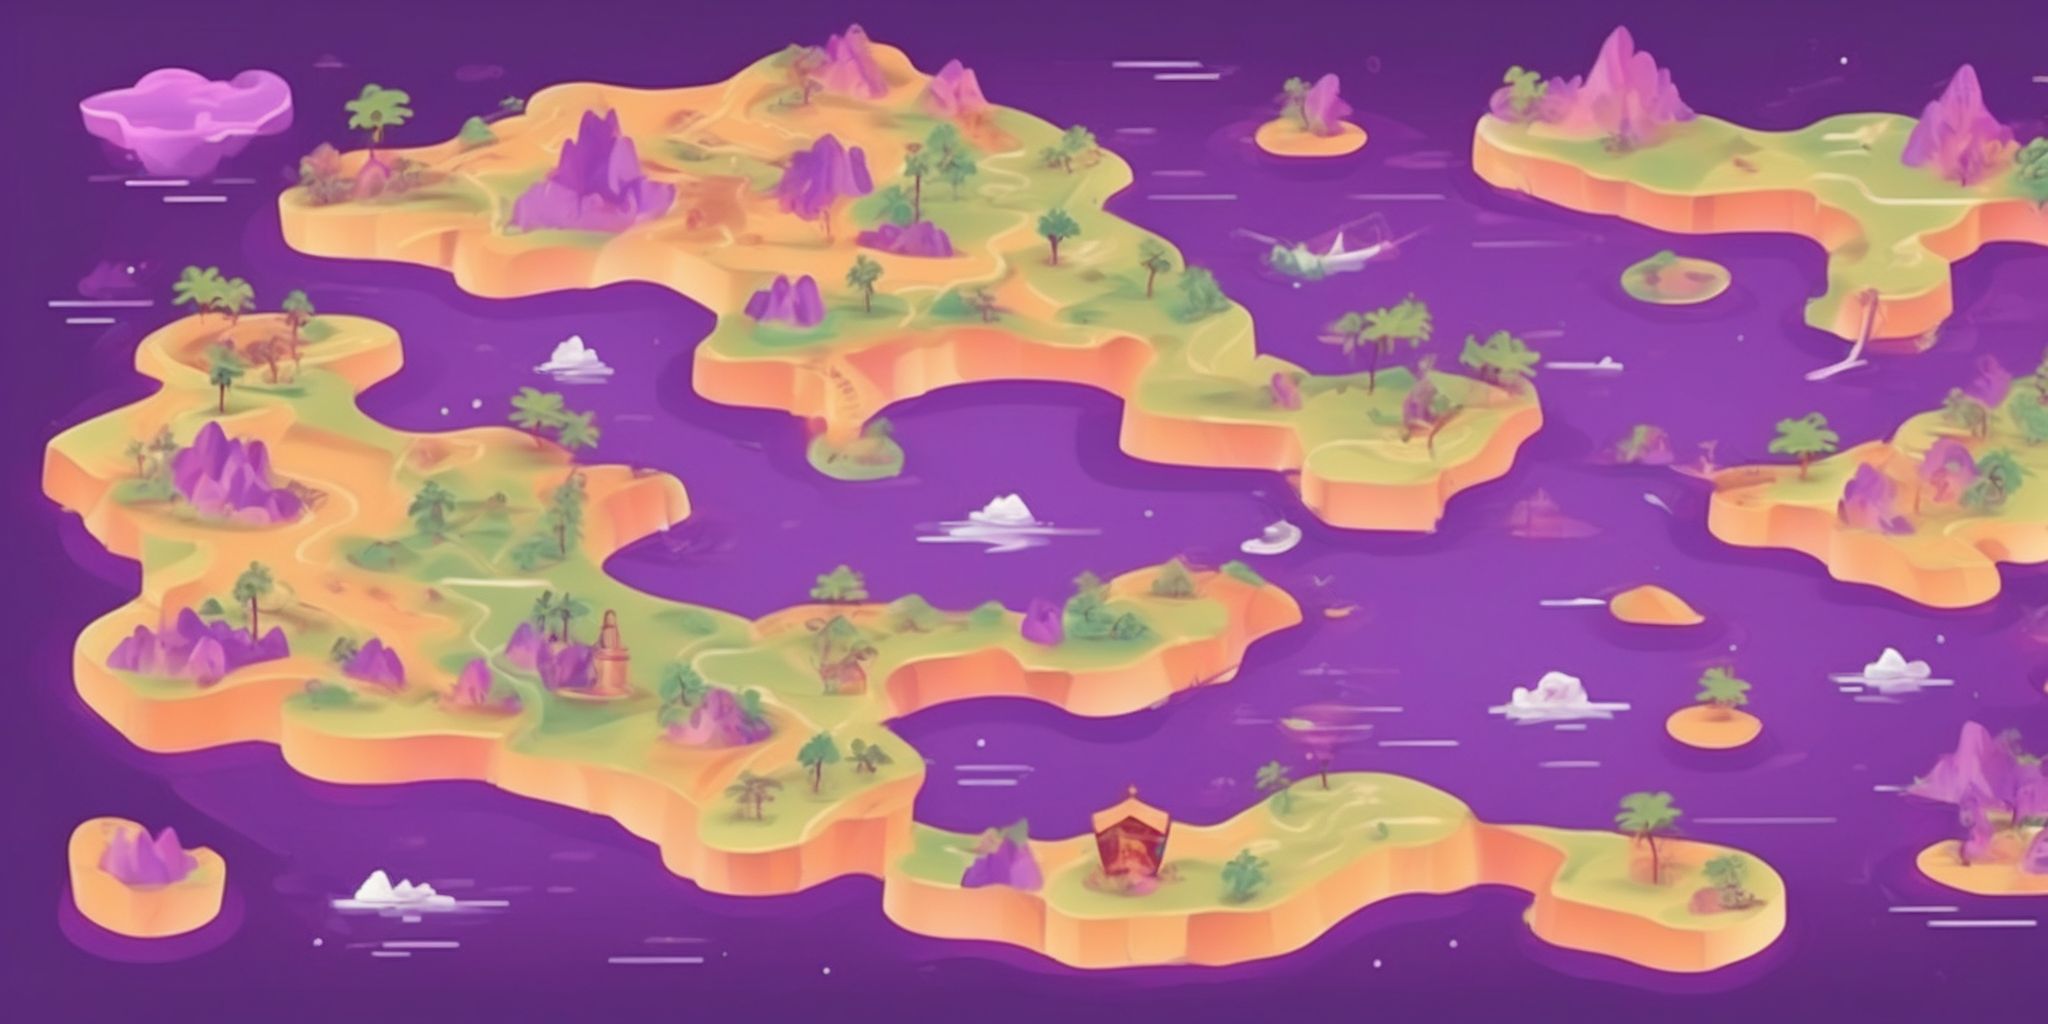 Treasure map in flat illustration style, colorful purple gradient colors